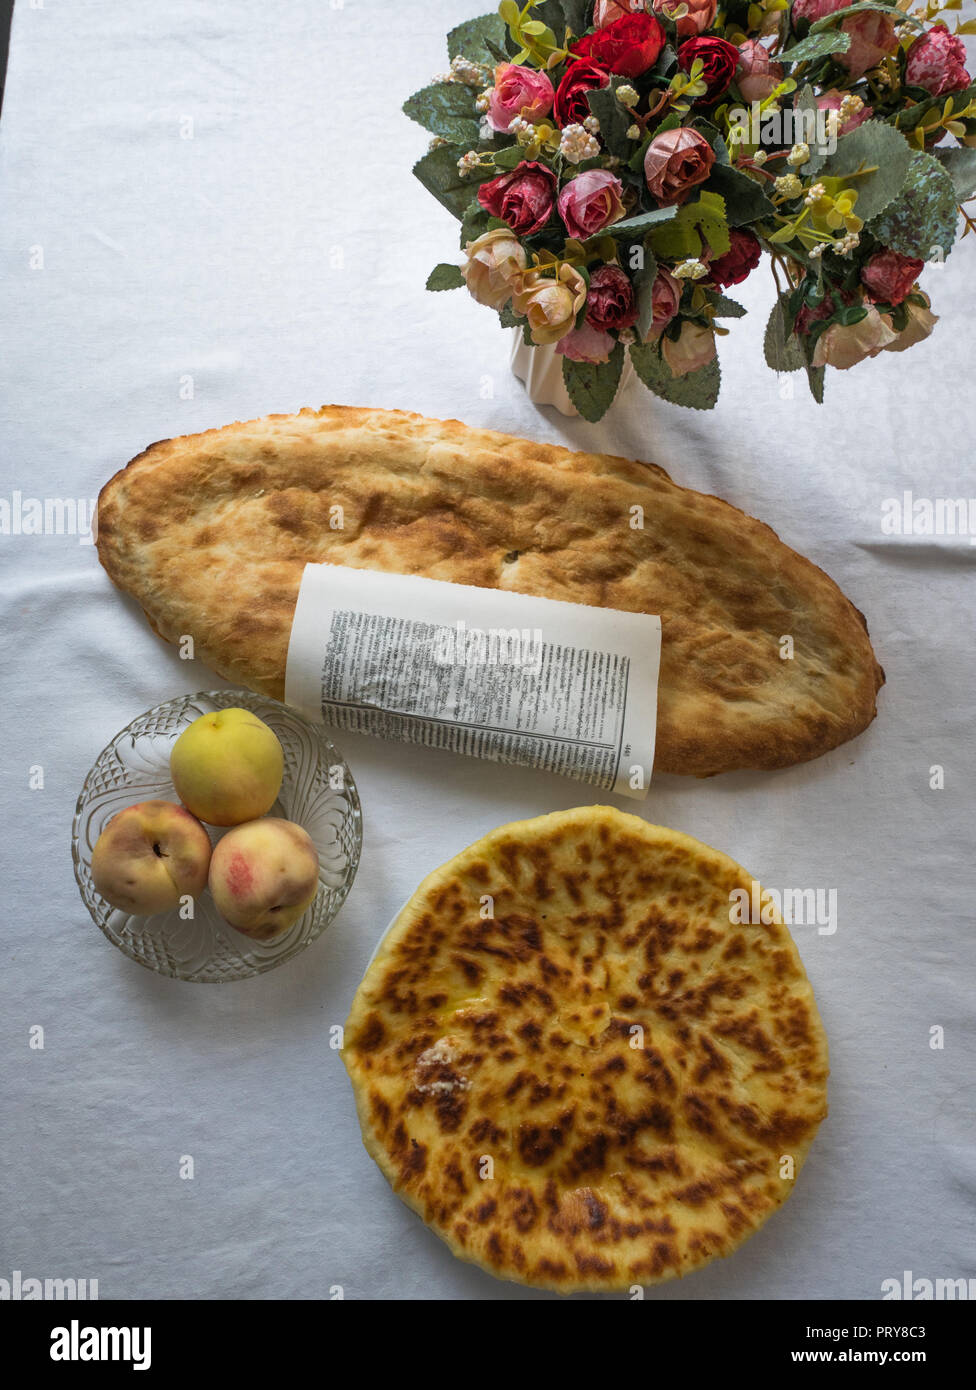 Khachapuri laid on a table. It is a traditional Georgian bread filled with different cheeses and styles can vary by region. Stock Photo